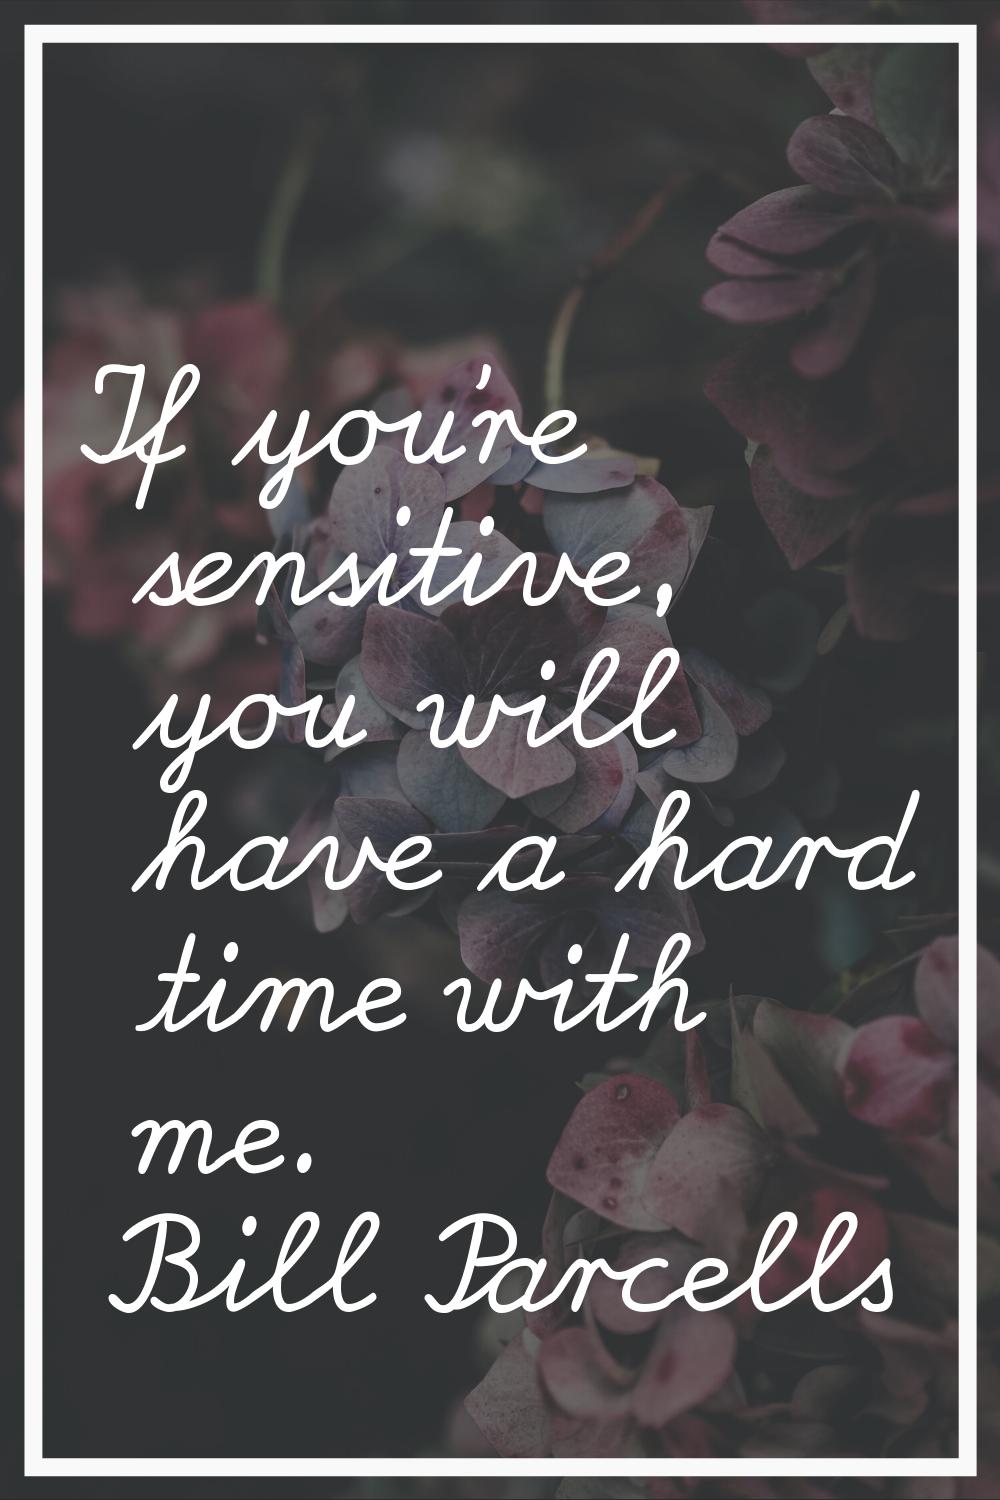 If you're sensitive, you will have a hard time with me.